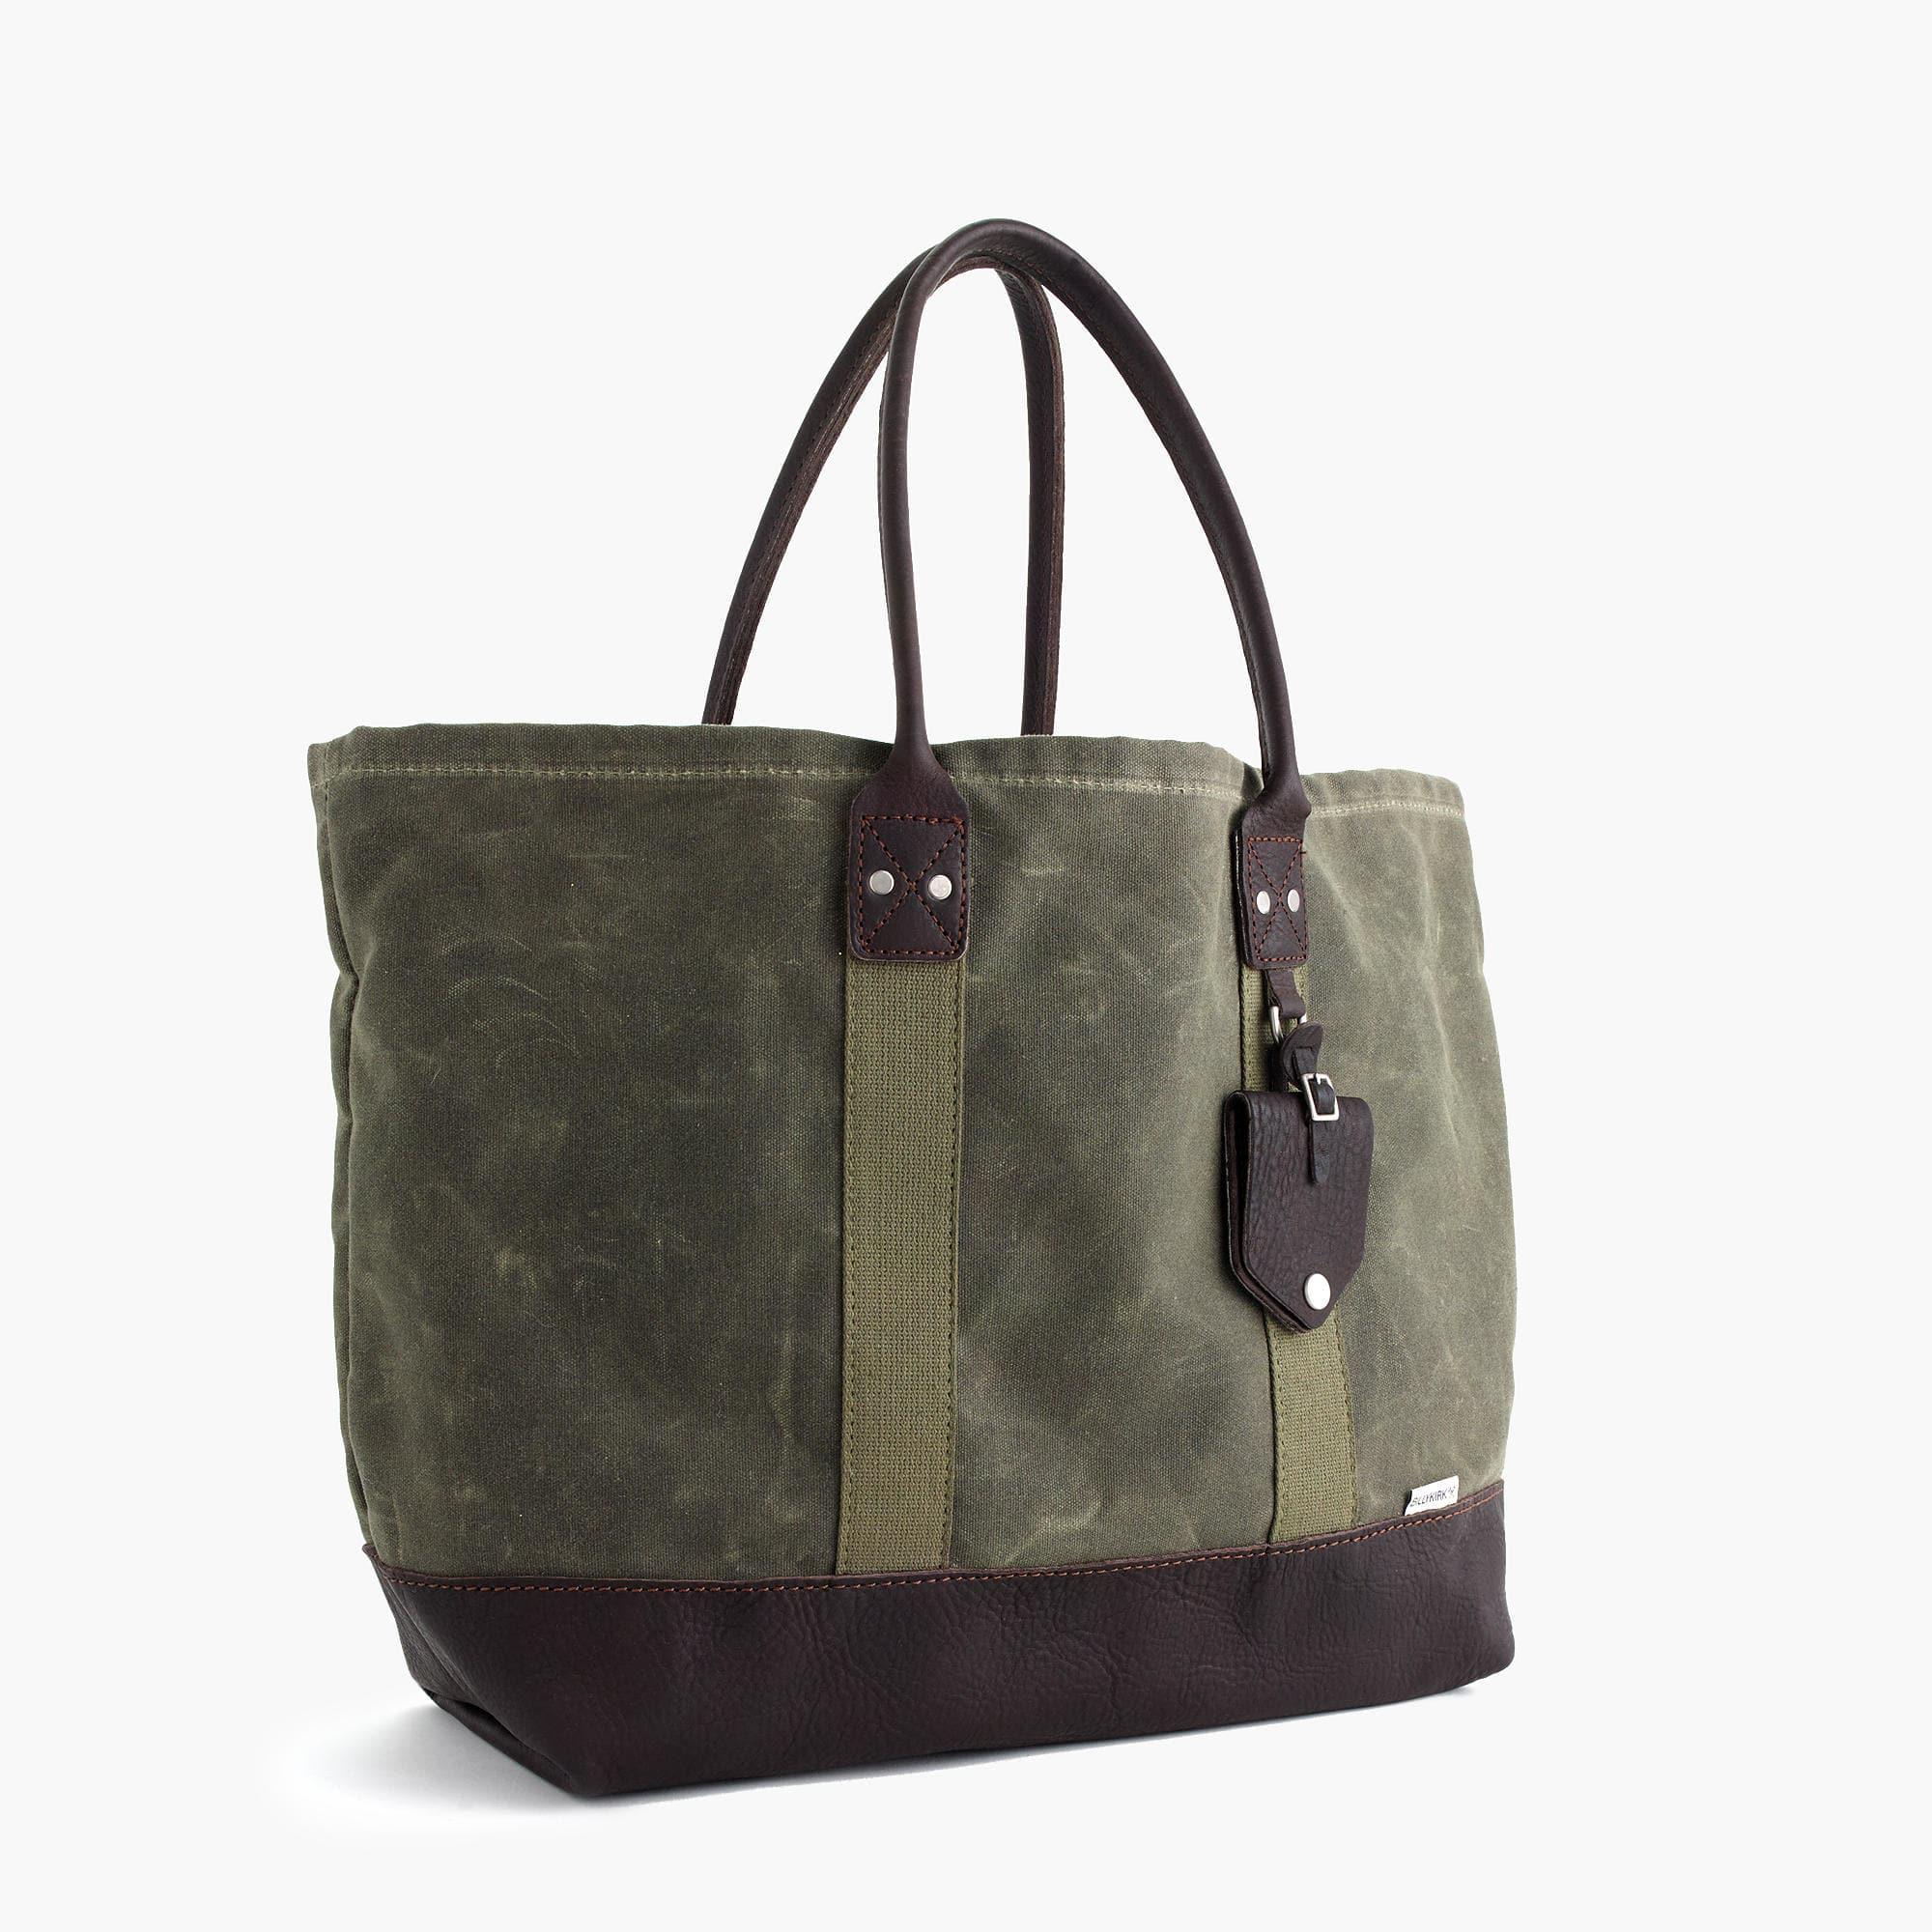 Lyst - J.Crew Billykirk Waxed Canvas Tote Bag In Olive in Green